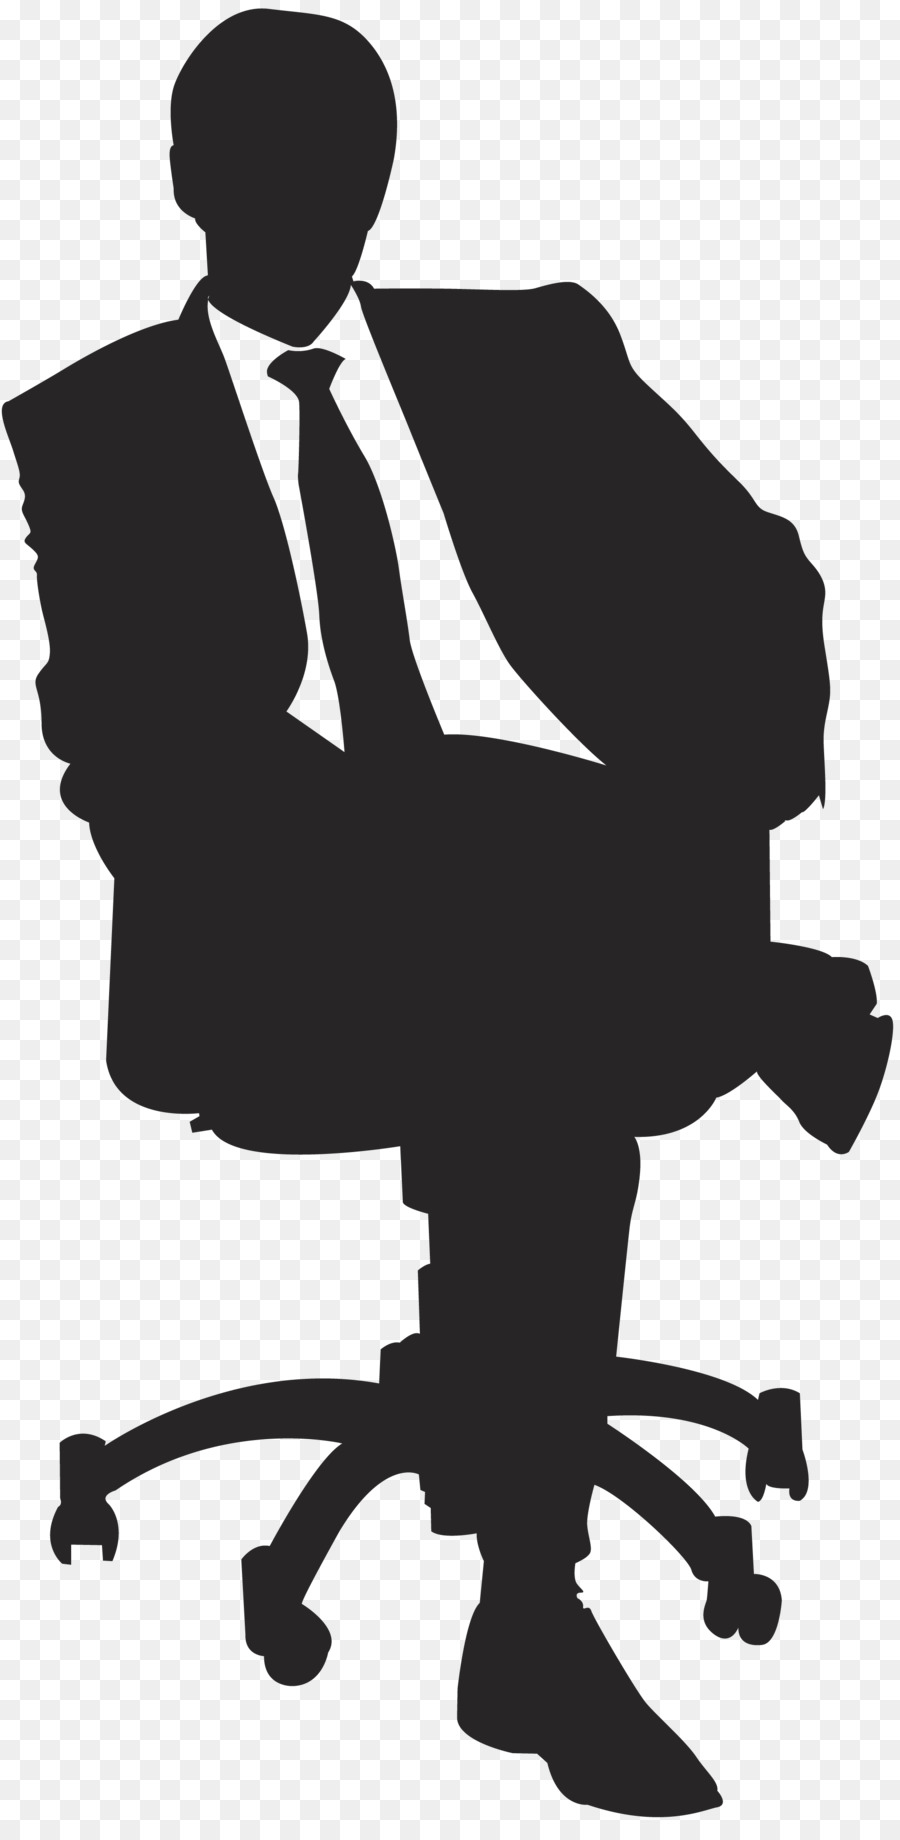 Silhouette Person Podcast - sitting man png download - 1897*3840 - Free Transparent Silhouette png Download.